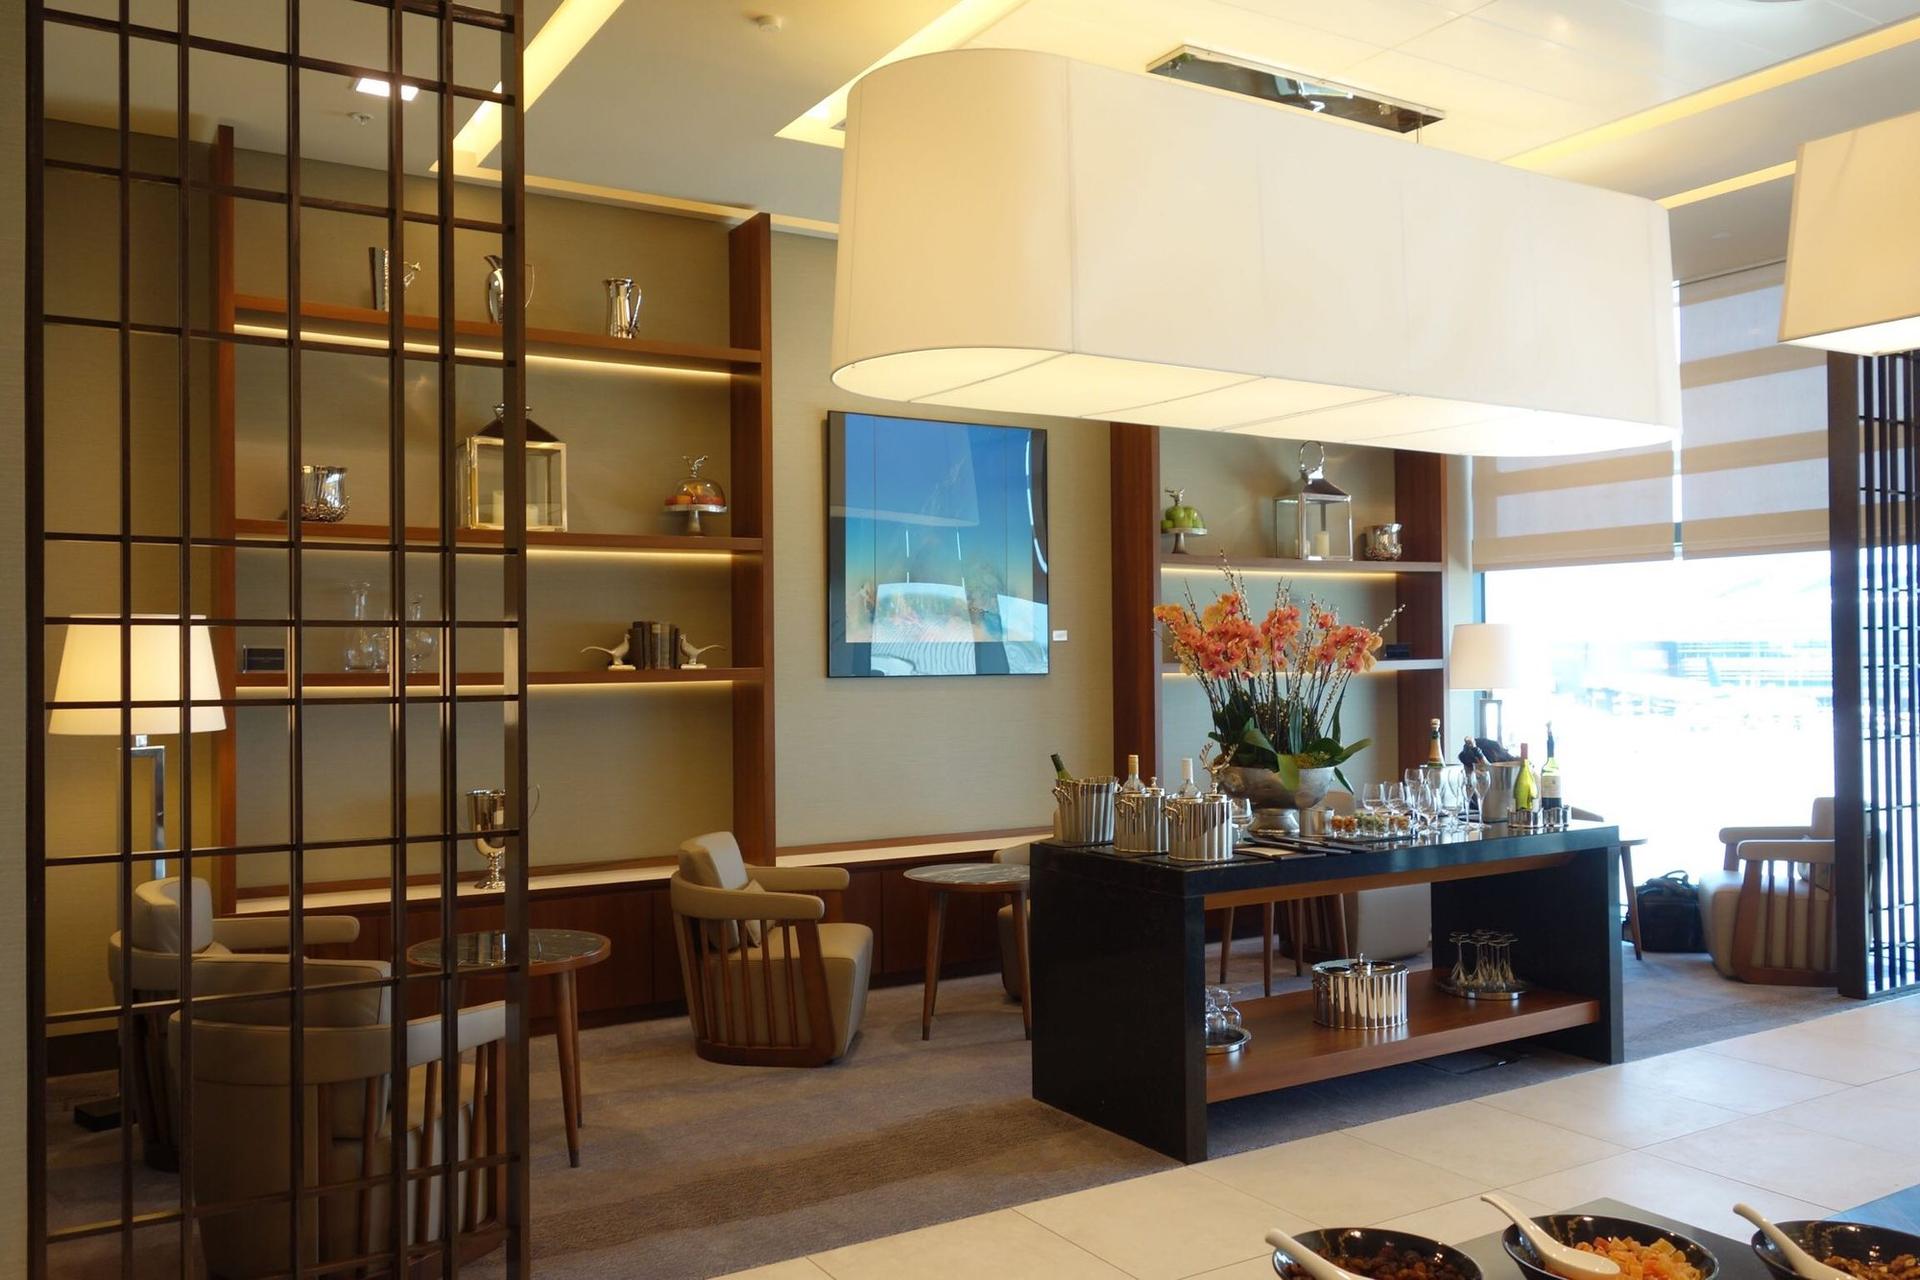 Singapore Airlines SilverKris Lounge image 6 of 36